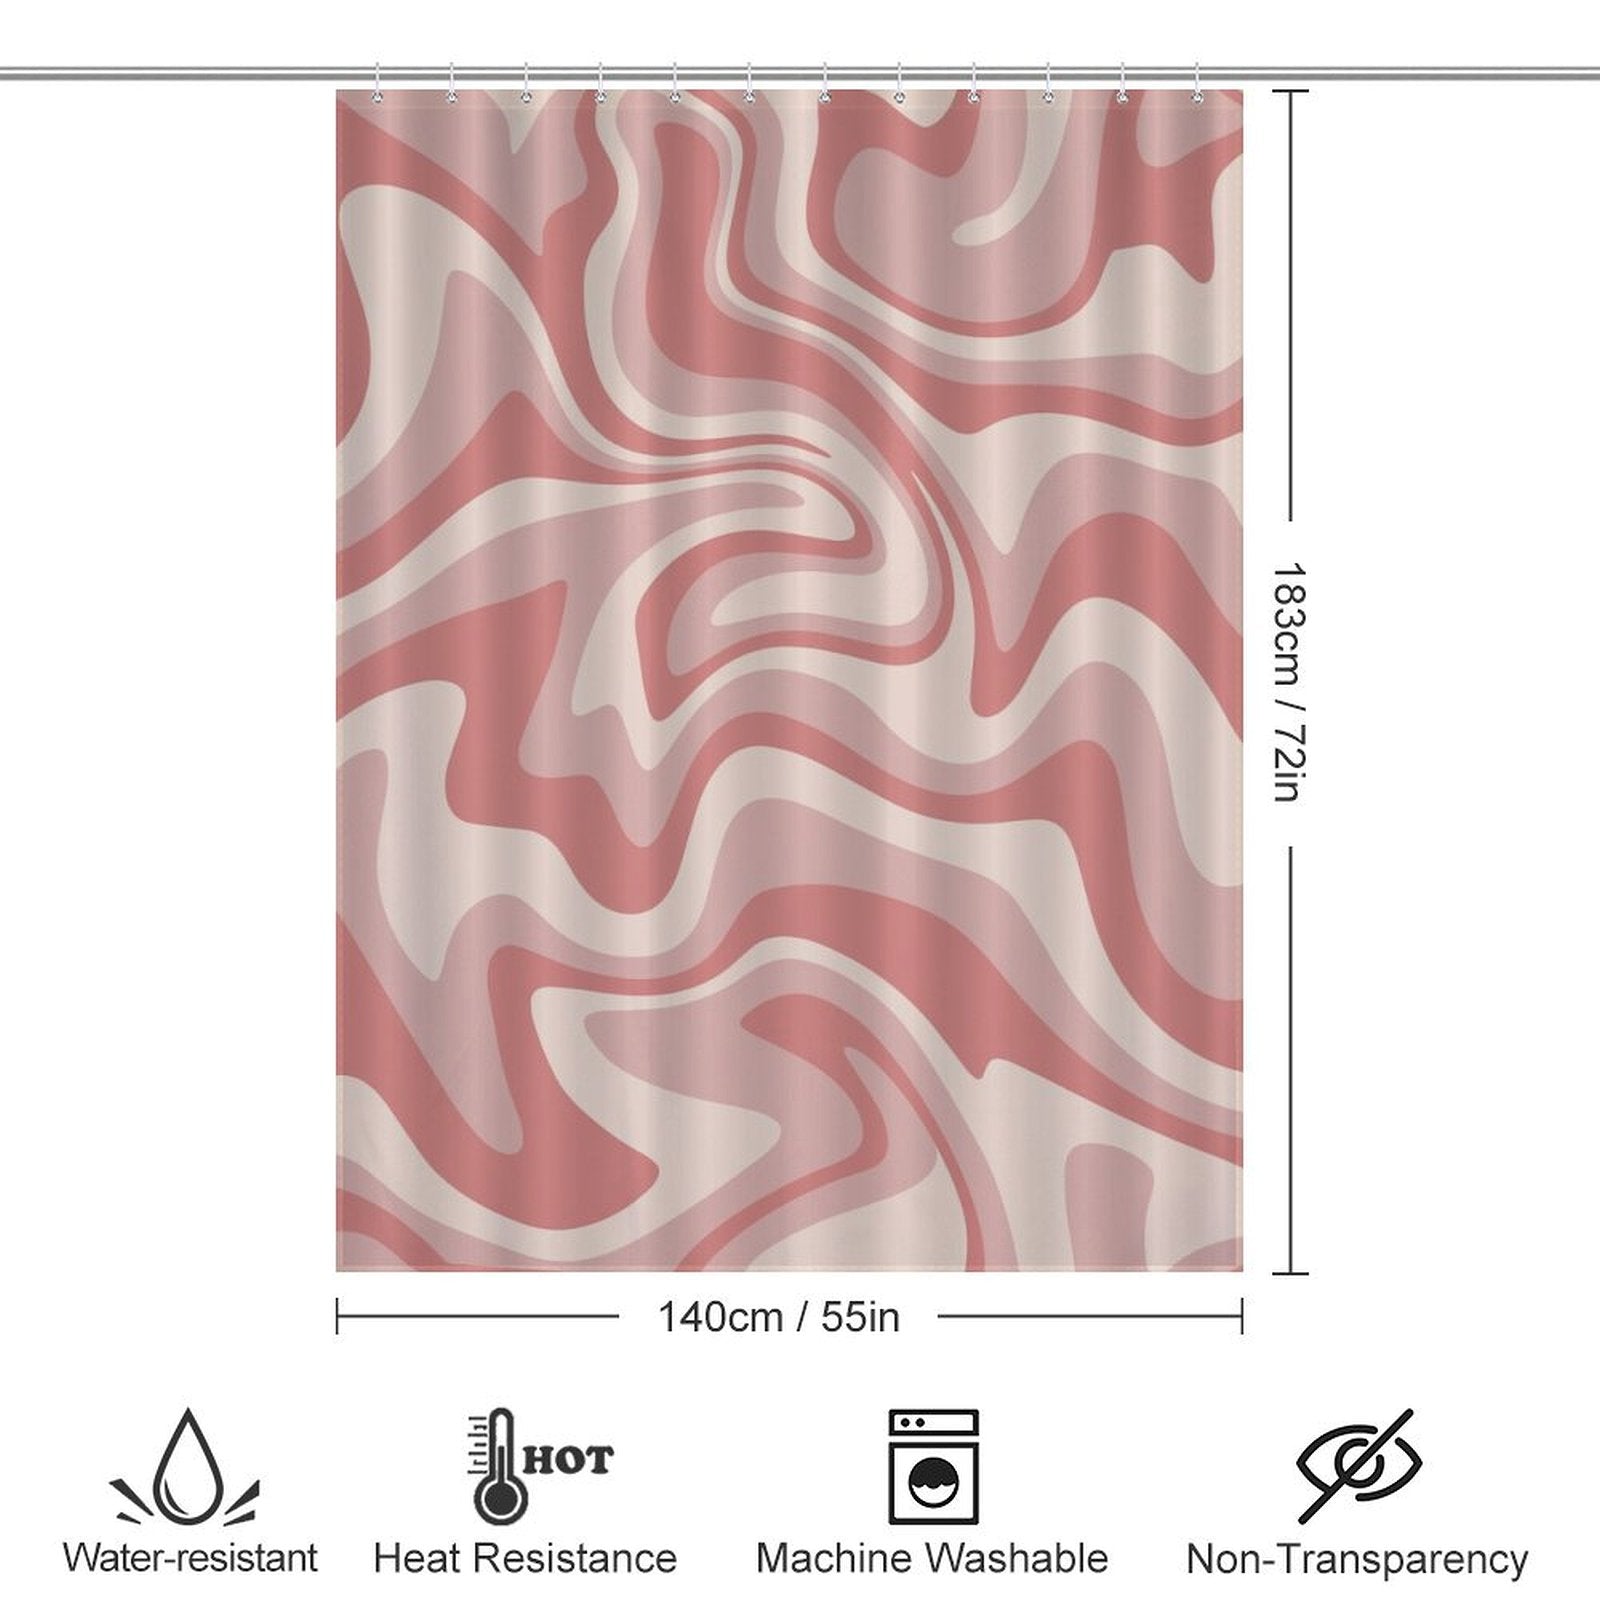 A Cotton Cat Vintage Modern Wave 70s Cute Wavy Swirl Retro Pink Abstract Shower Curtain-Cottoncat with a Retro Pink Abstract pattern displayed with dimensions of 183 cm (72 in) by 140 cm (55 in). Icons below denote water resistance, heat resistance, machine washable, and non-transparency.